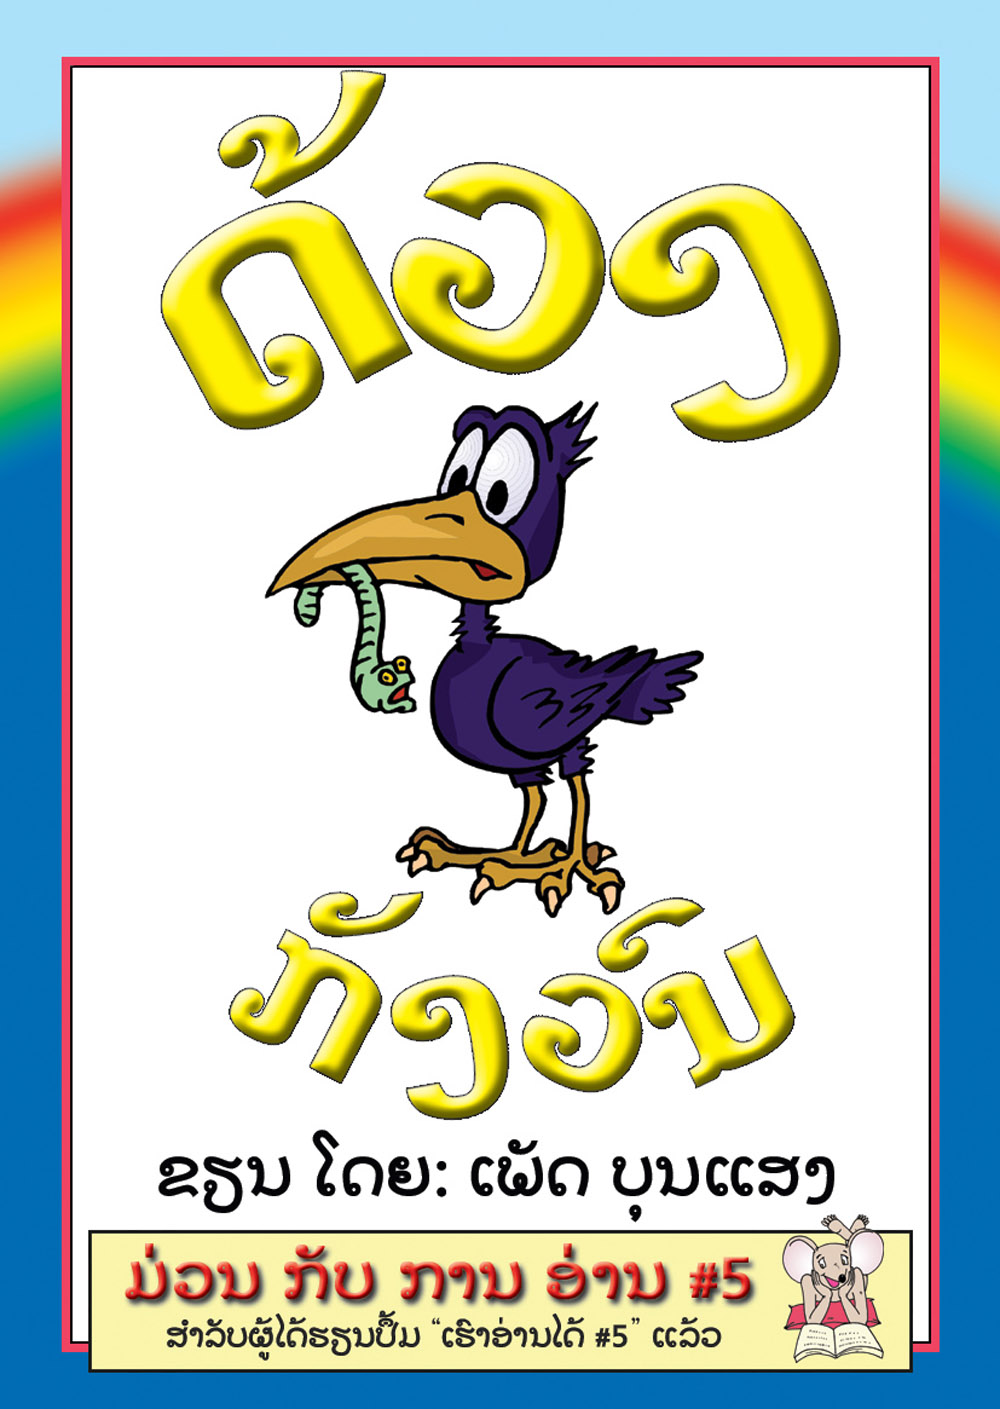 The Worm is Worried large book cover, published in Lao language